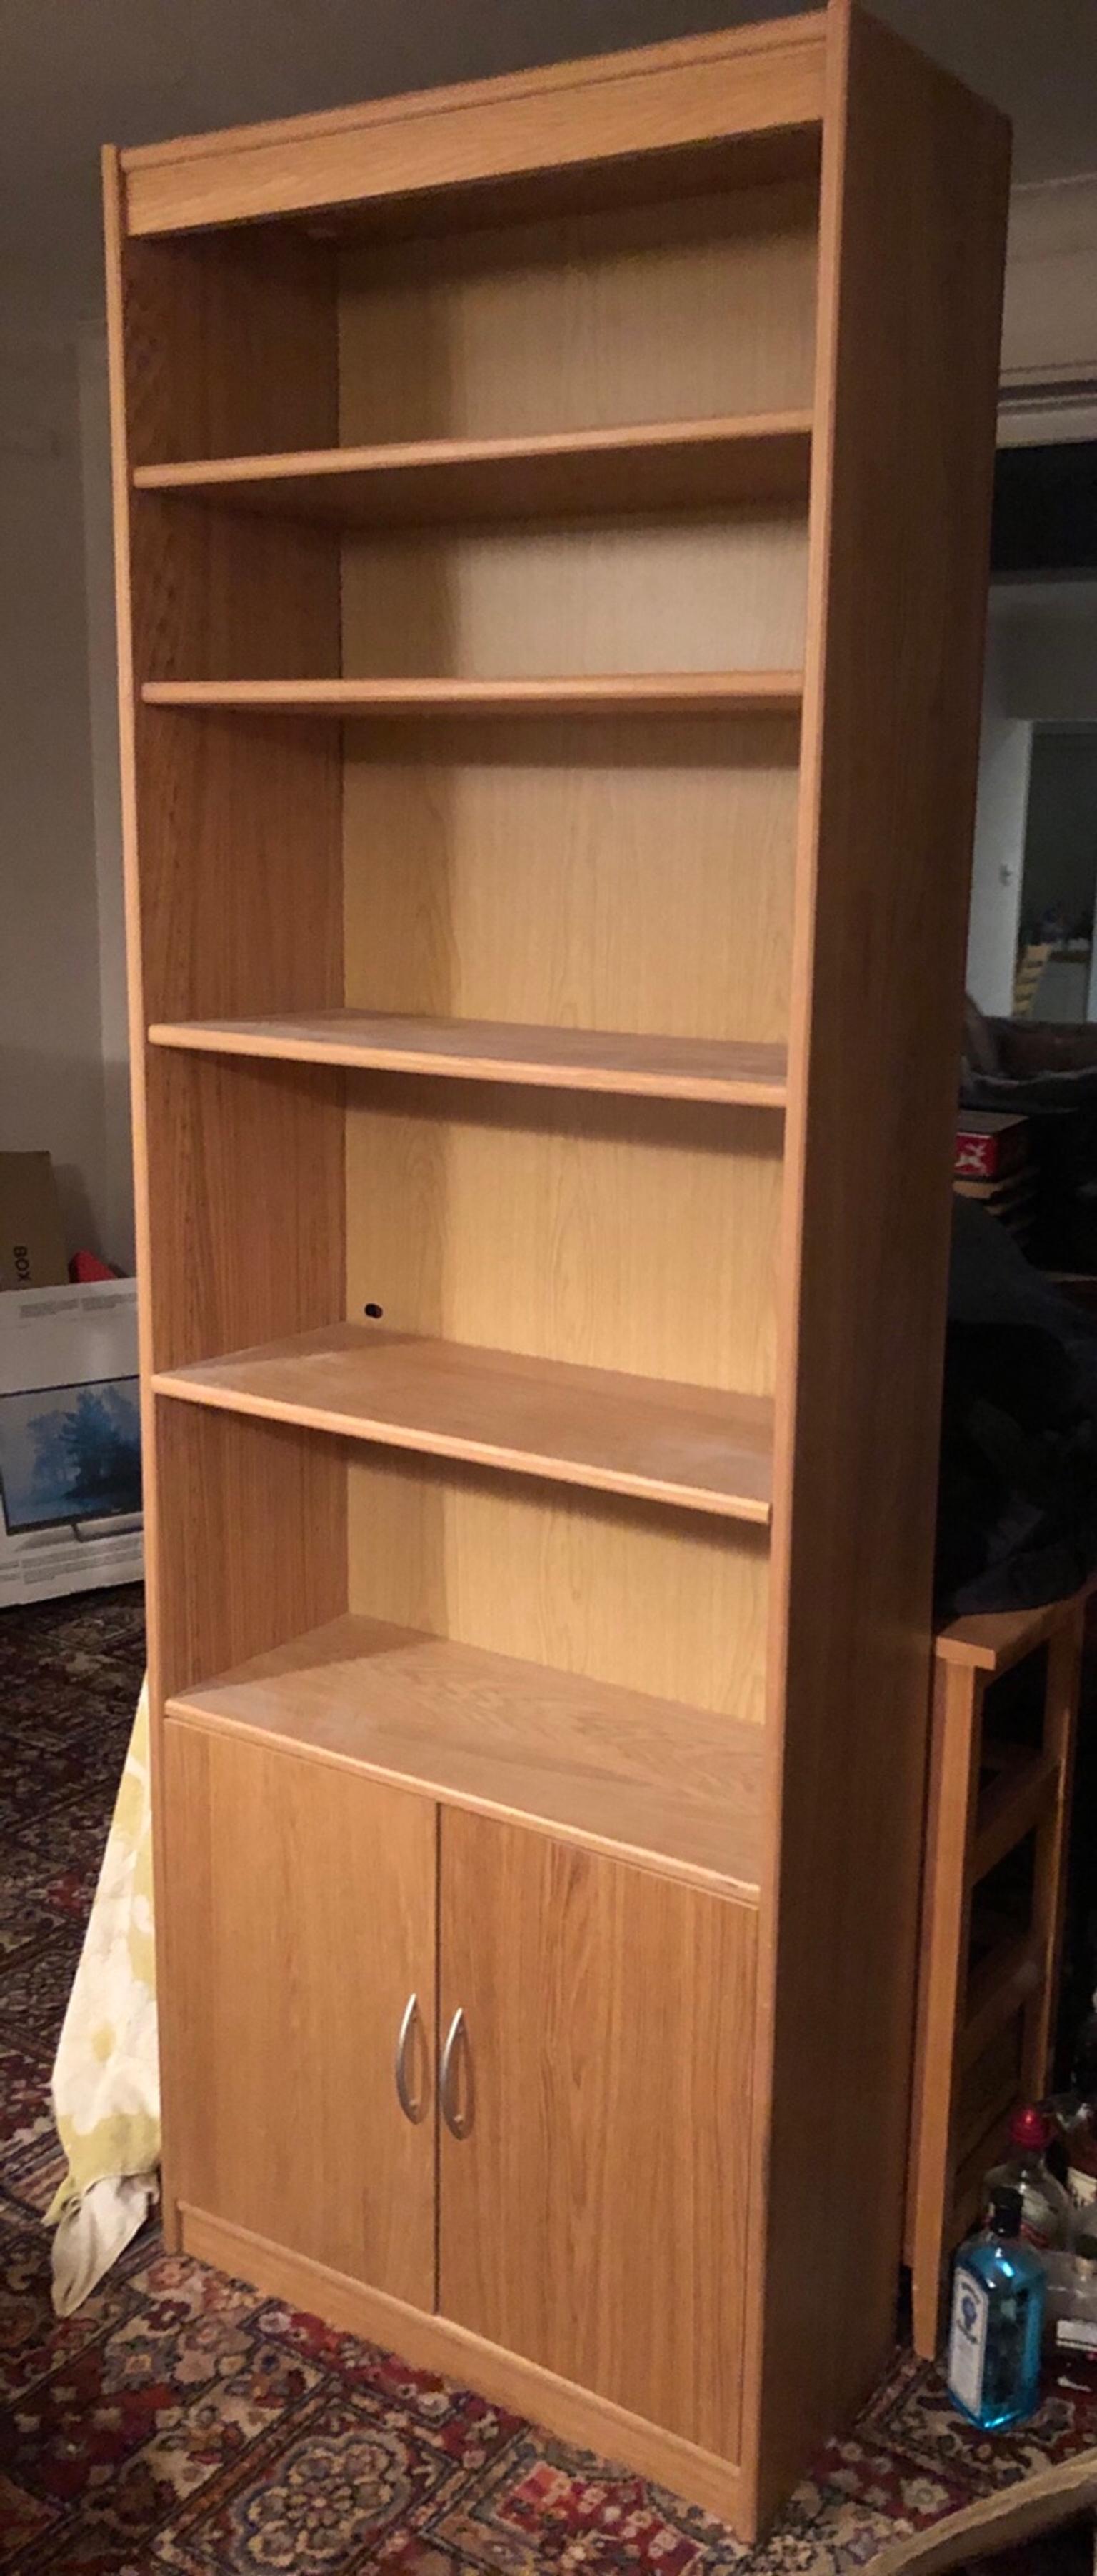 2 X John Lewis Bookcases In Sk23 Peak For 50 00 For Sale Shpock